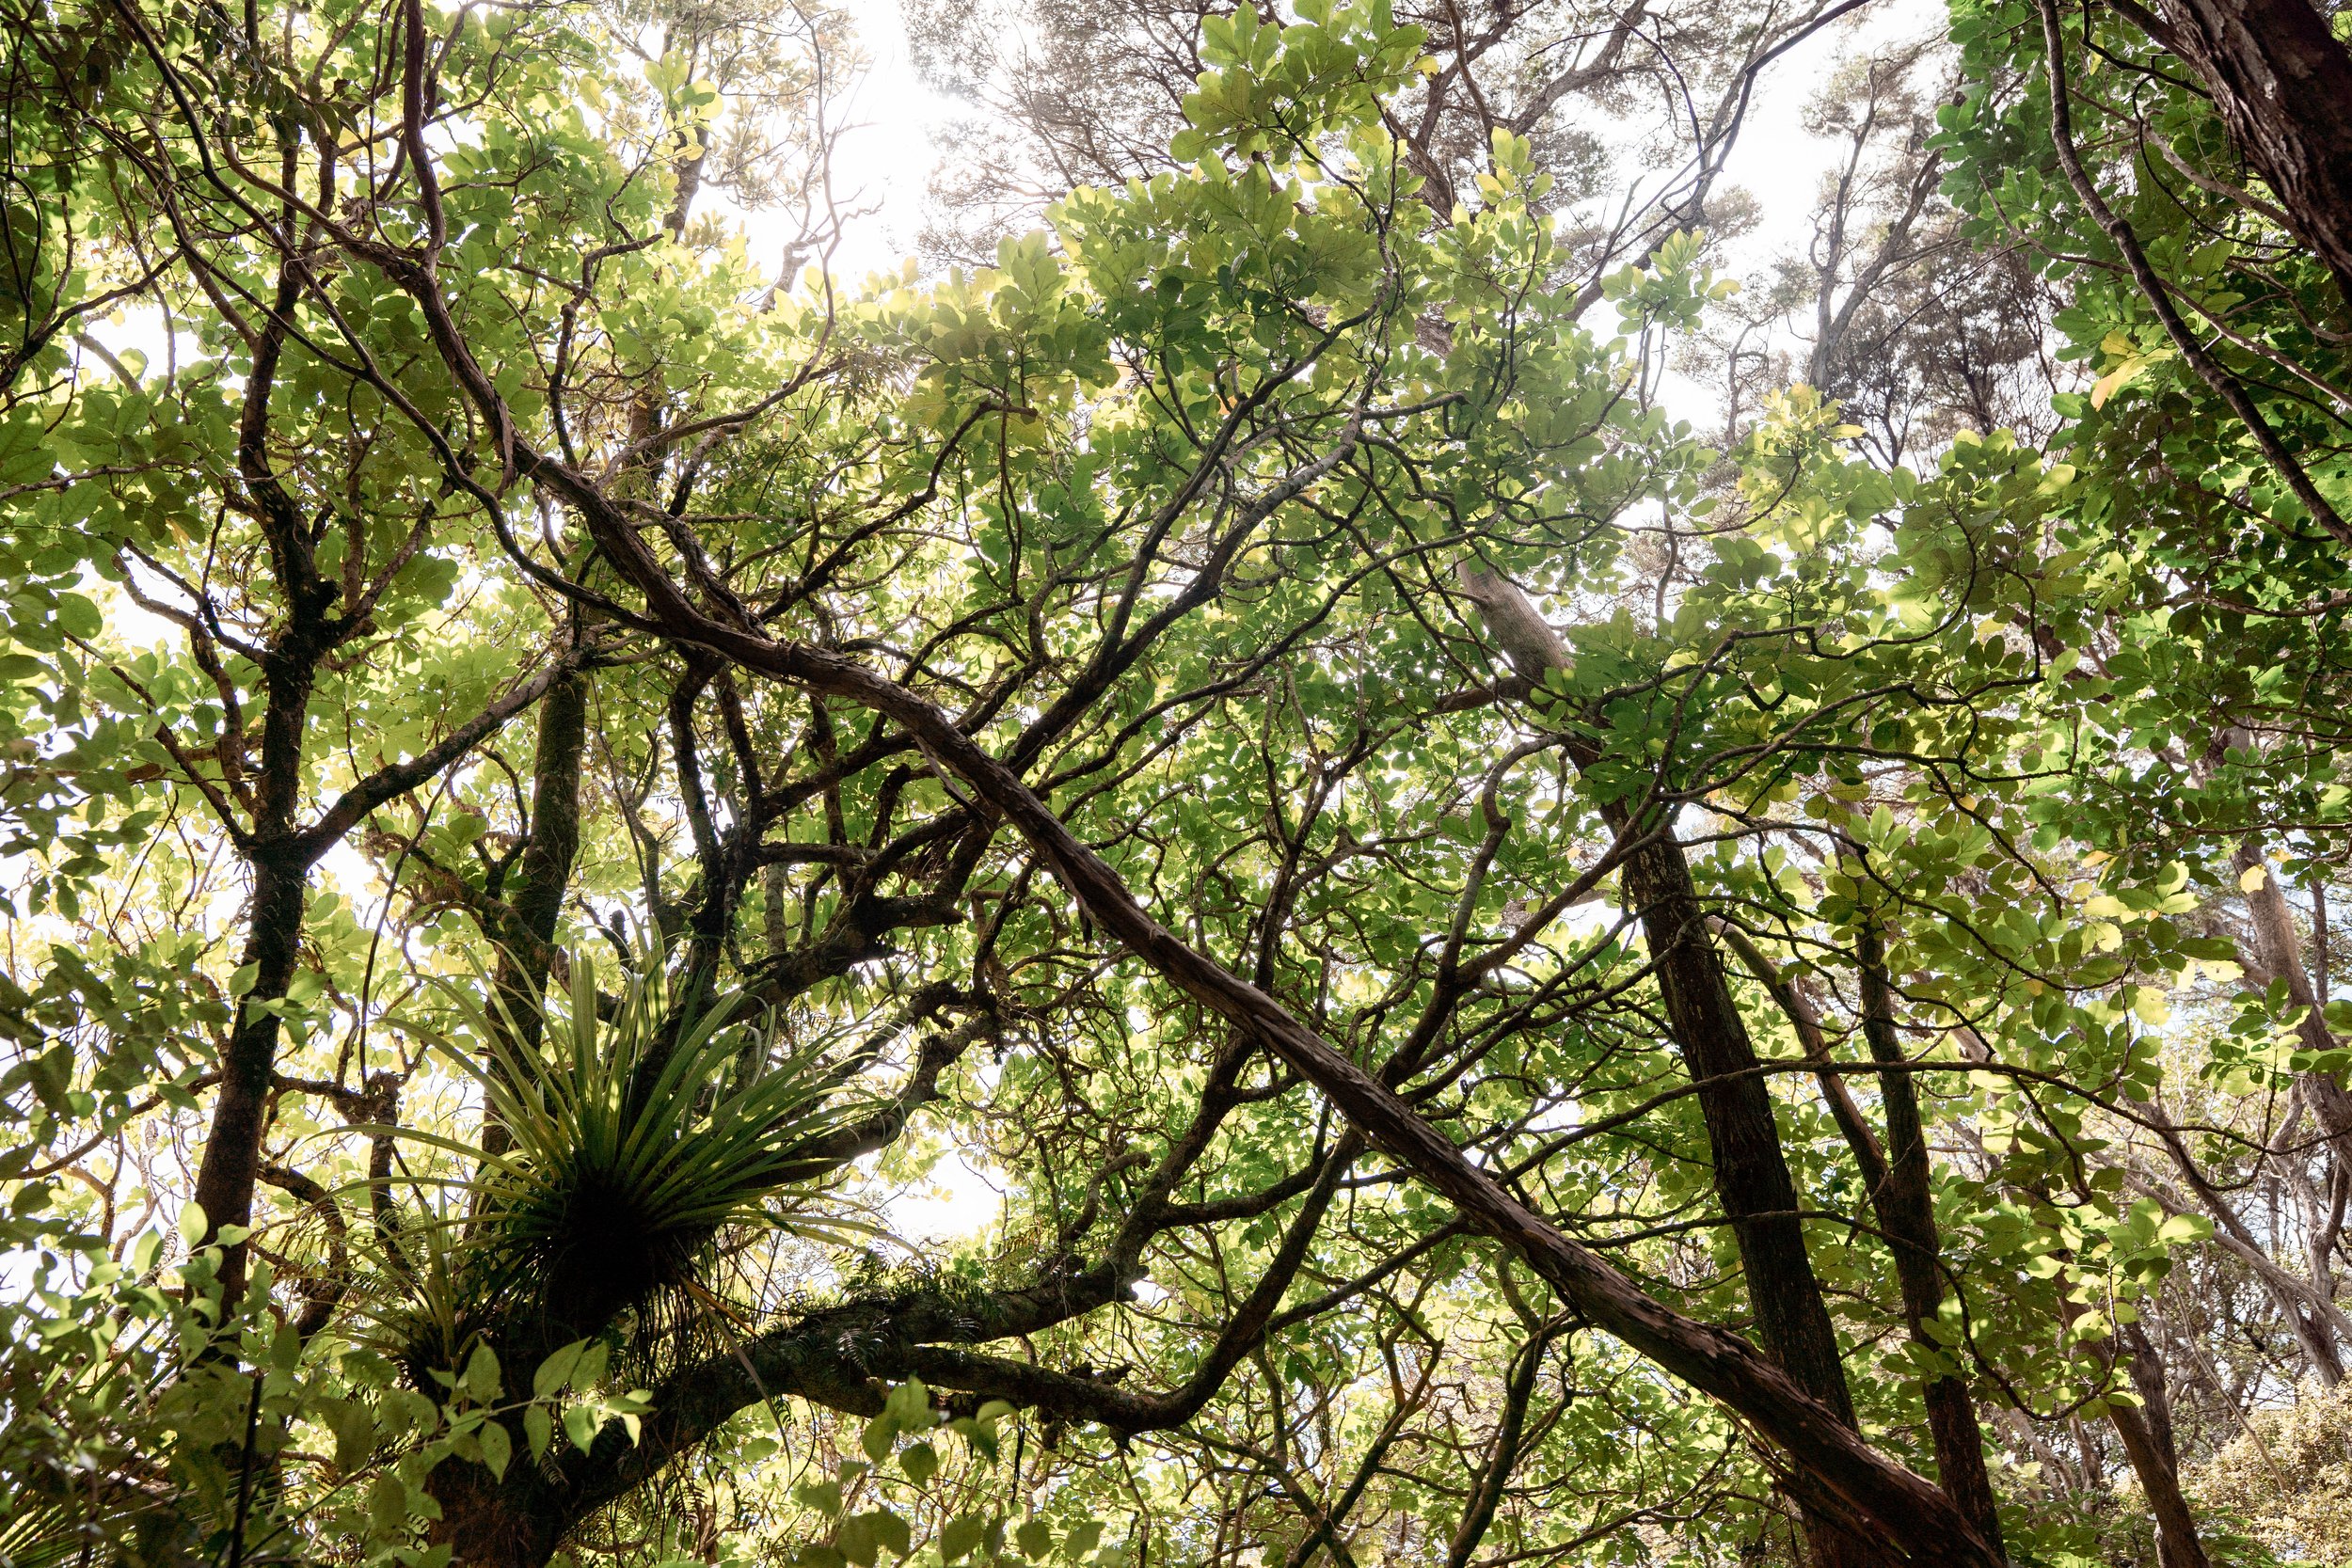 Mature forest canopy